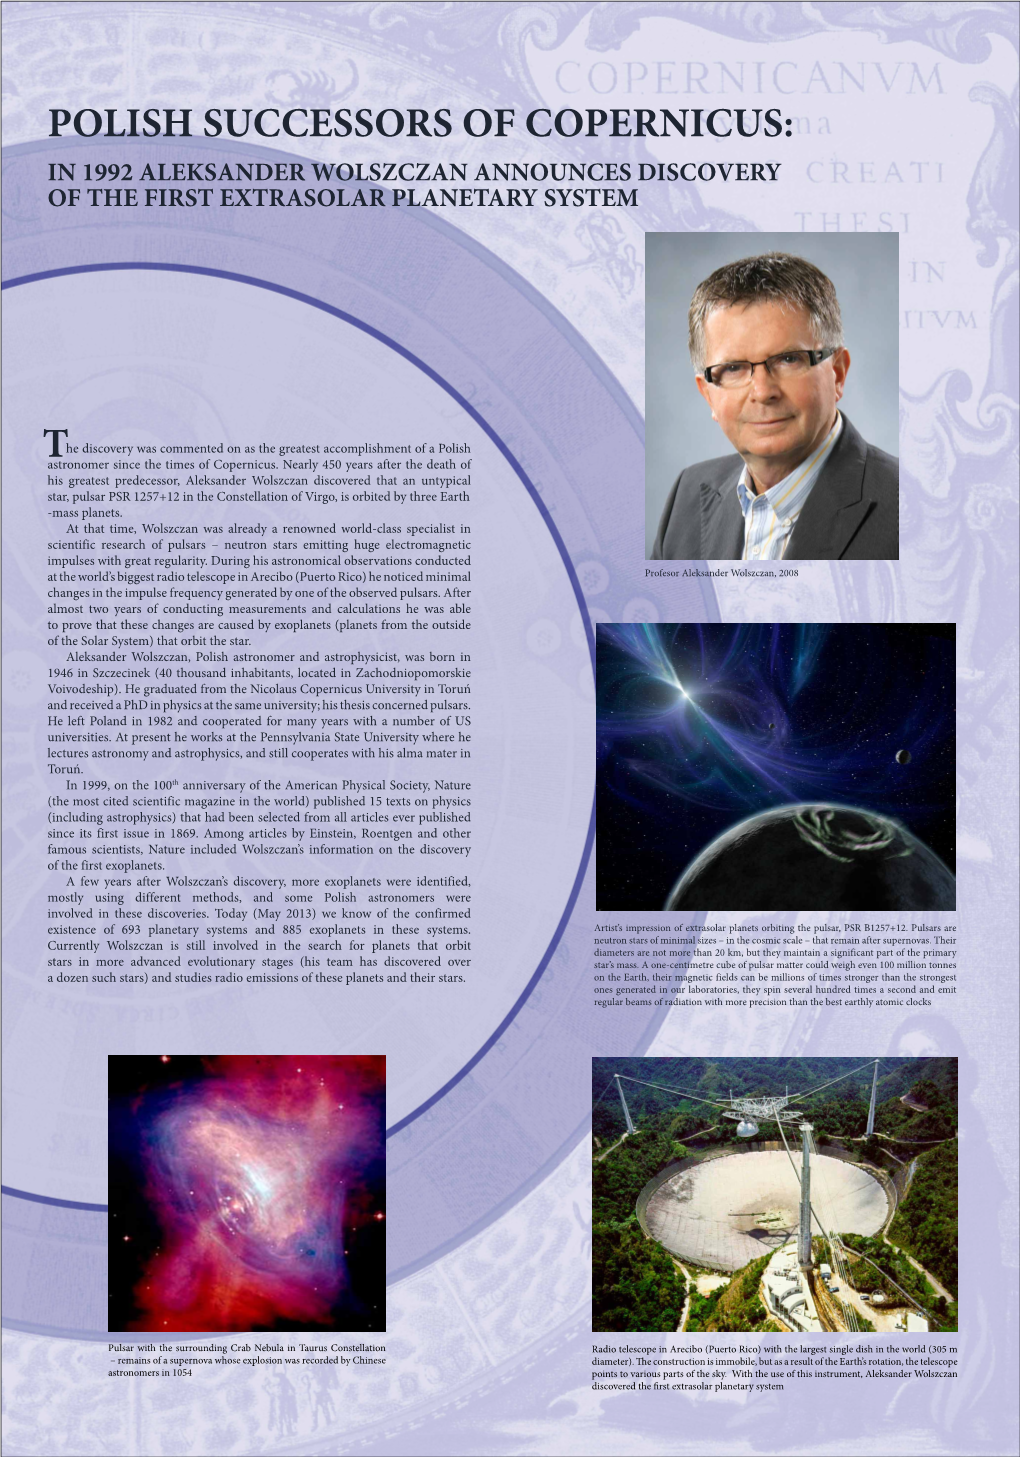 In 1992 Aleksander Wolszczan Announces Discovery of the First Extrasolar Planetary System